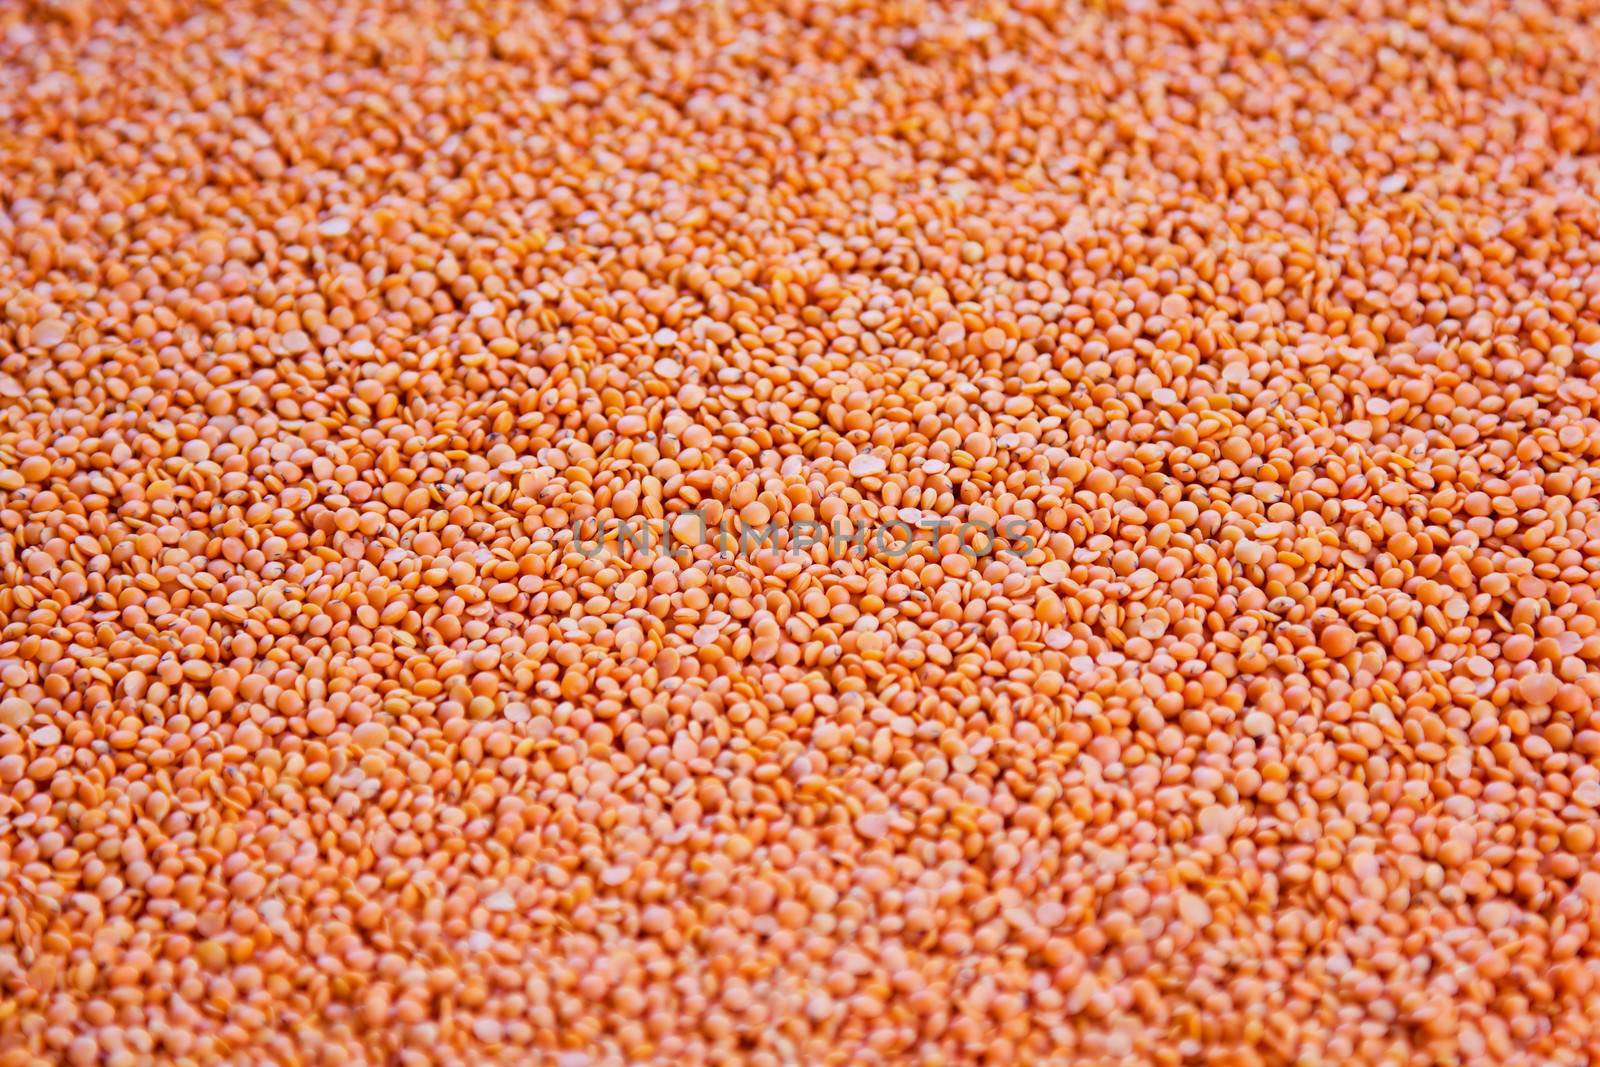 Orange Lentil is generally cook as soup and salad